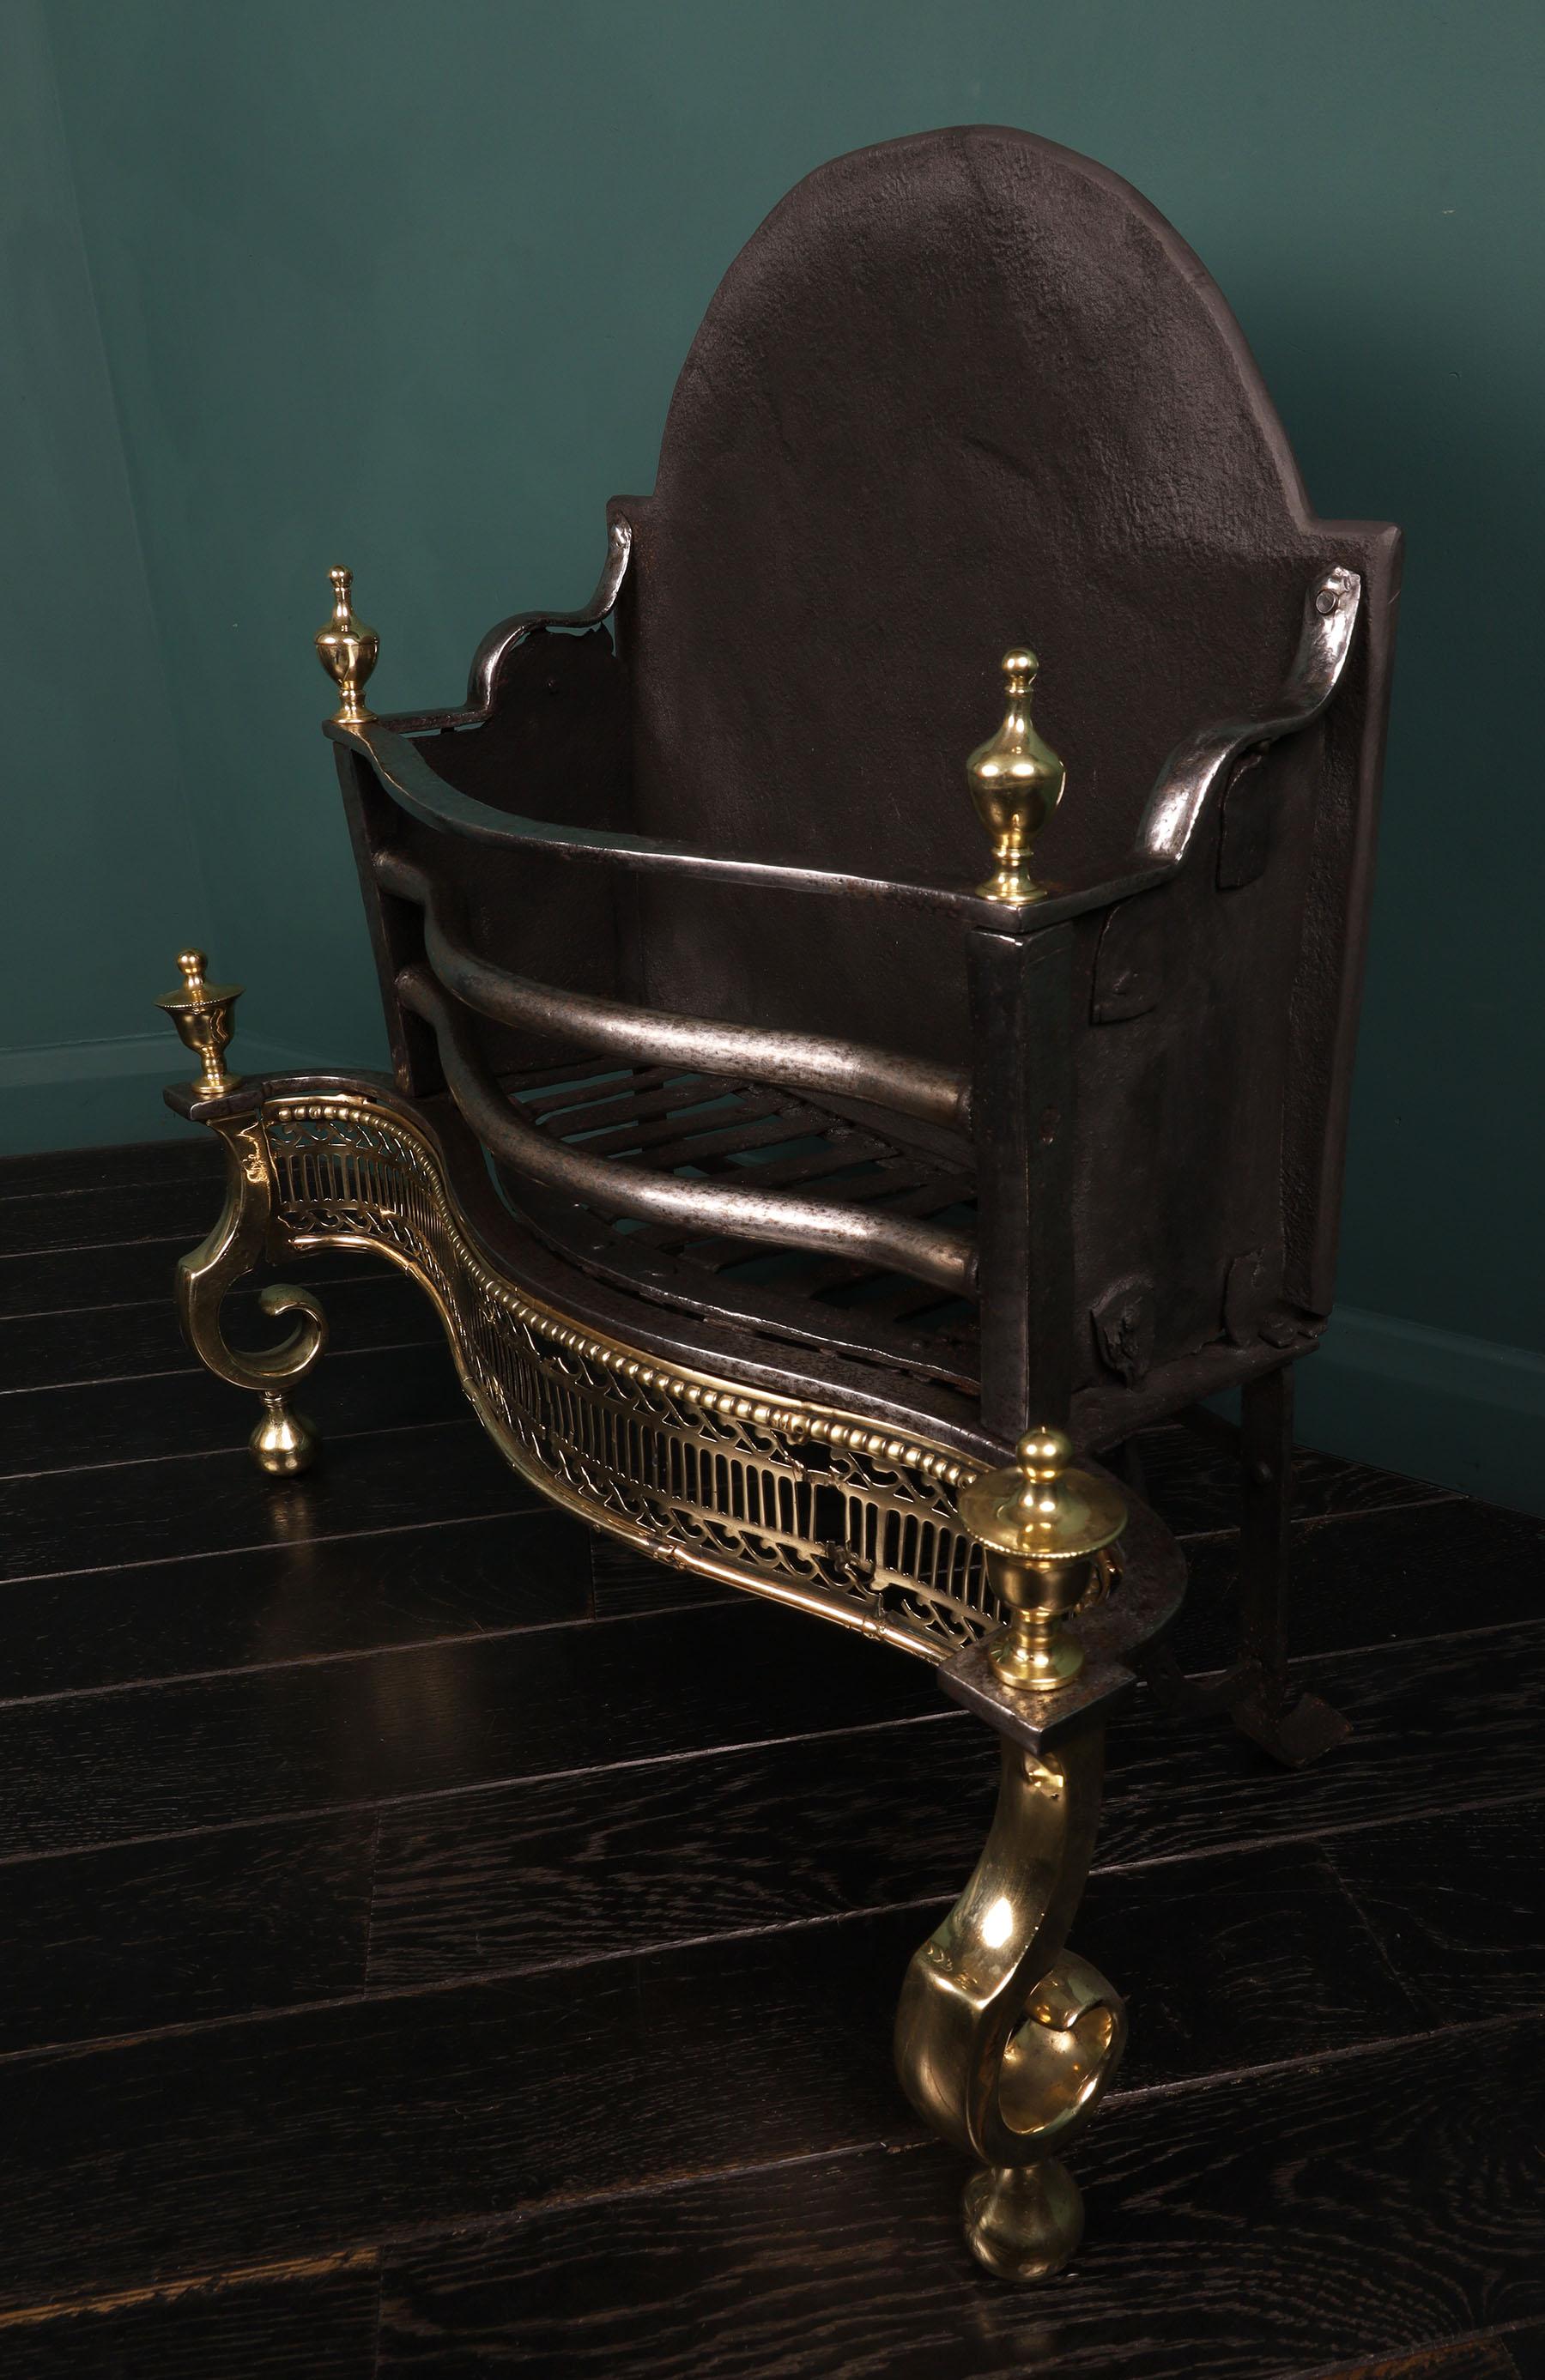 A Late 18th century English Wrought & Brass Fire Basket, the railed front above a fluted brass fret with s-scroll between the scroll standards and urn finials uppermost. Losses to brass fret. Restored.
Height of burning area: 10.

Circa 1790